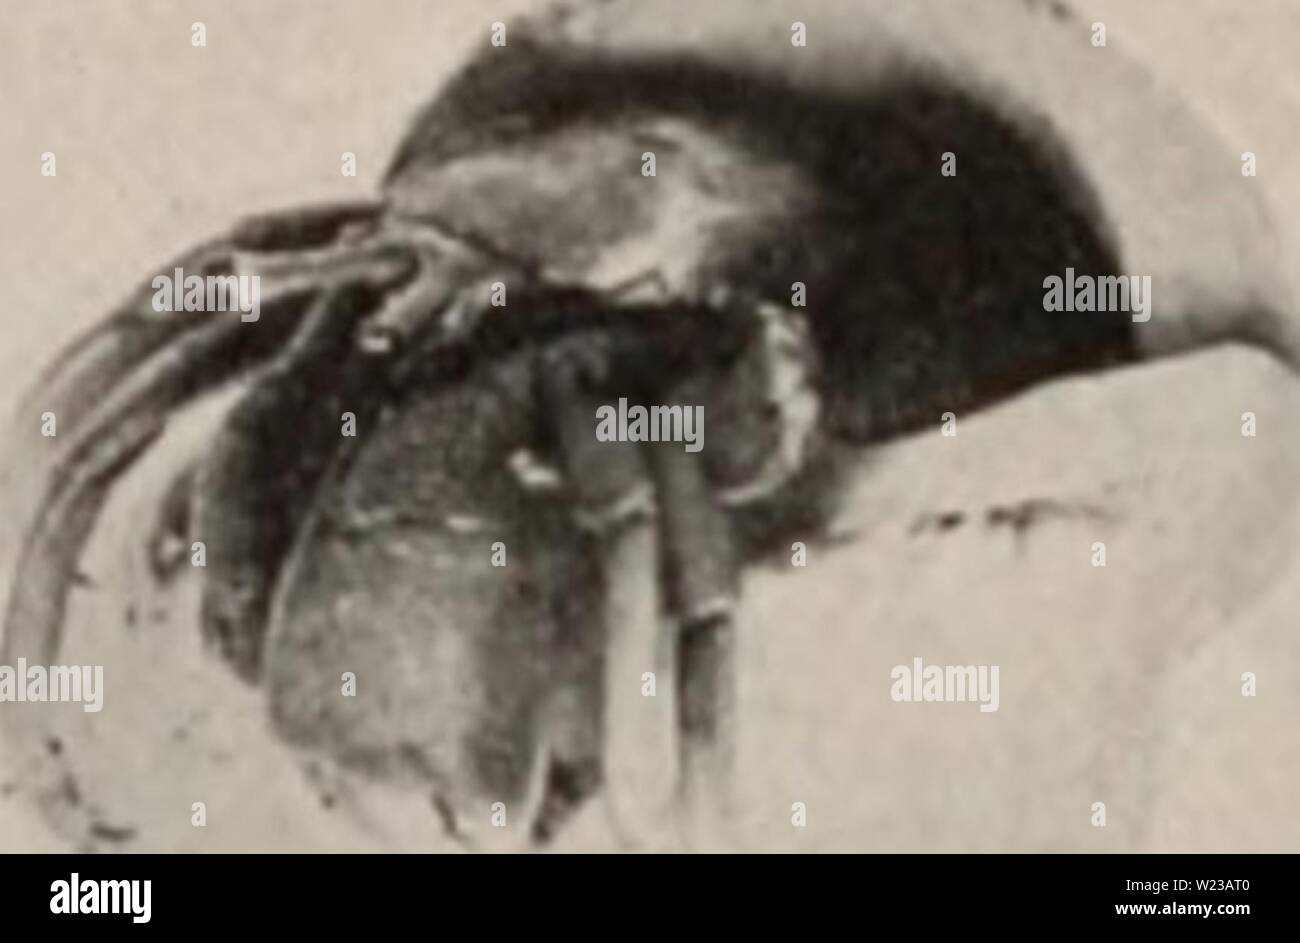 Archive image from page 149 of Decapod crustacea of Bermuda (1908-1922). Decapod crustacea of Bermuda  decapodcrustacea00verr Year: 1908-1922  440 A. E. Verrill—Decapod Crustacea of Bermuda. one of the fresher specimens arc mostly dark red, becoming brighter red on the margins and at the joints ; tlie cliche have a patch of dark olive brown on the middle of both &gt;ide&gt; of the palm; the tip&gt; of the dactylus and thumb arc white or pah- yellow; the whole surface of the chelipeds and ambulatory legs, except on the white 56    Figure 56. — ;iln&gt;ut ii.-itunil size. Phot. A. H. V. tips, is Stock Photo